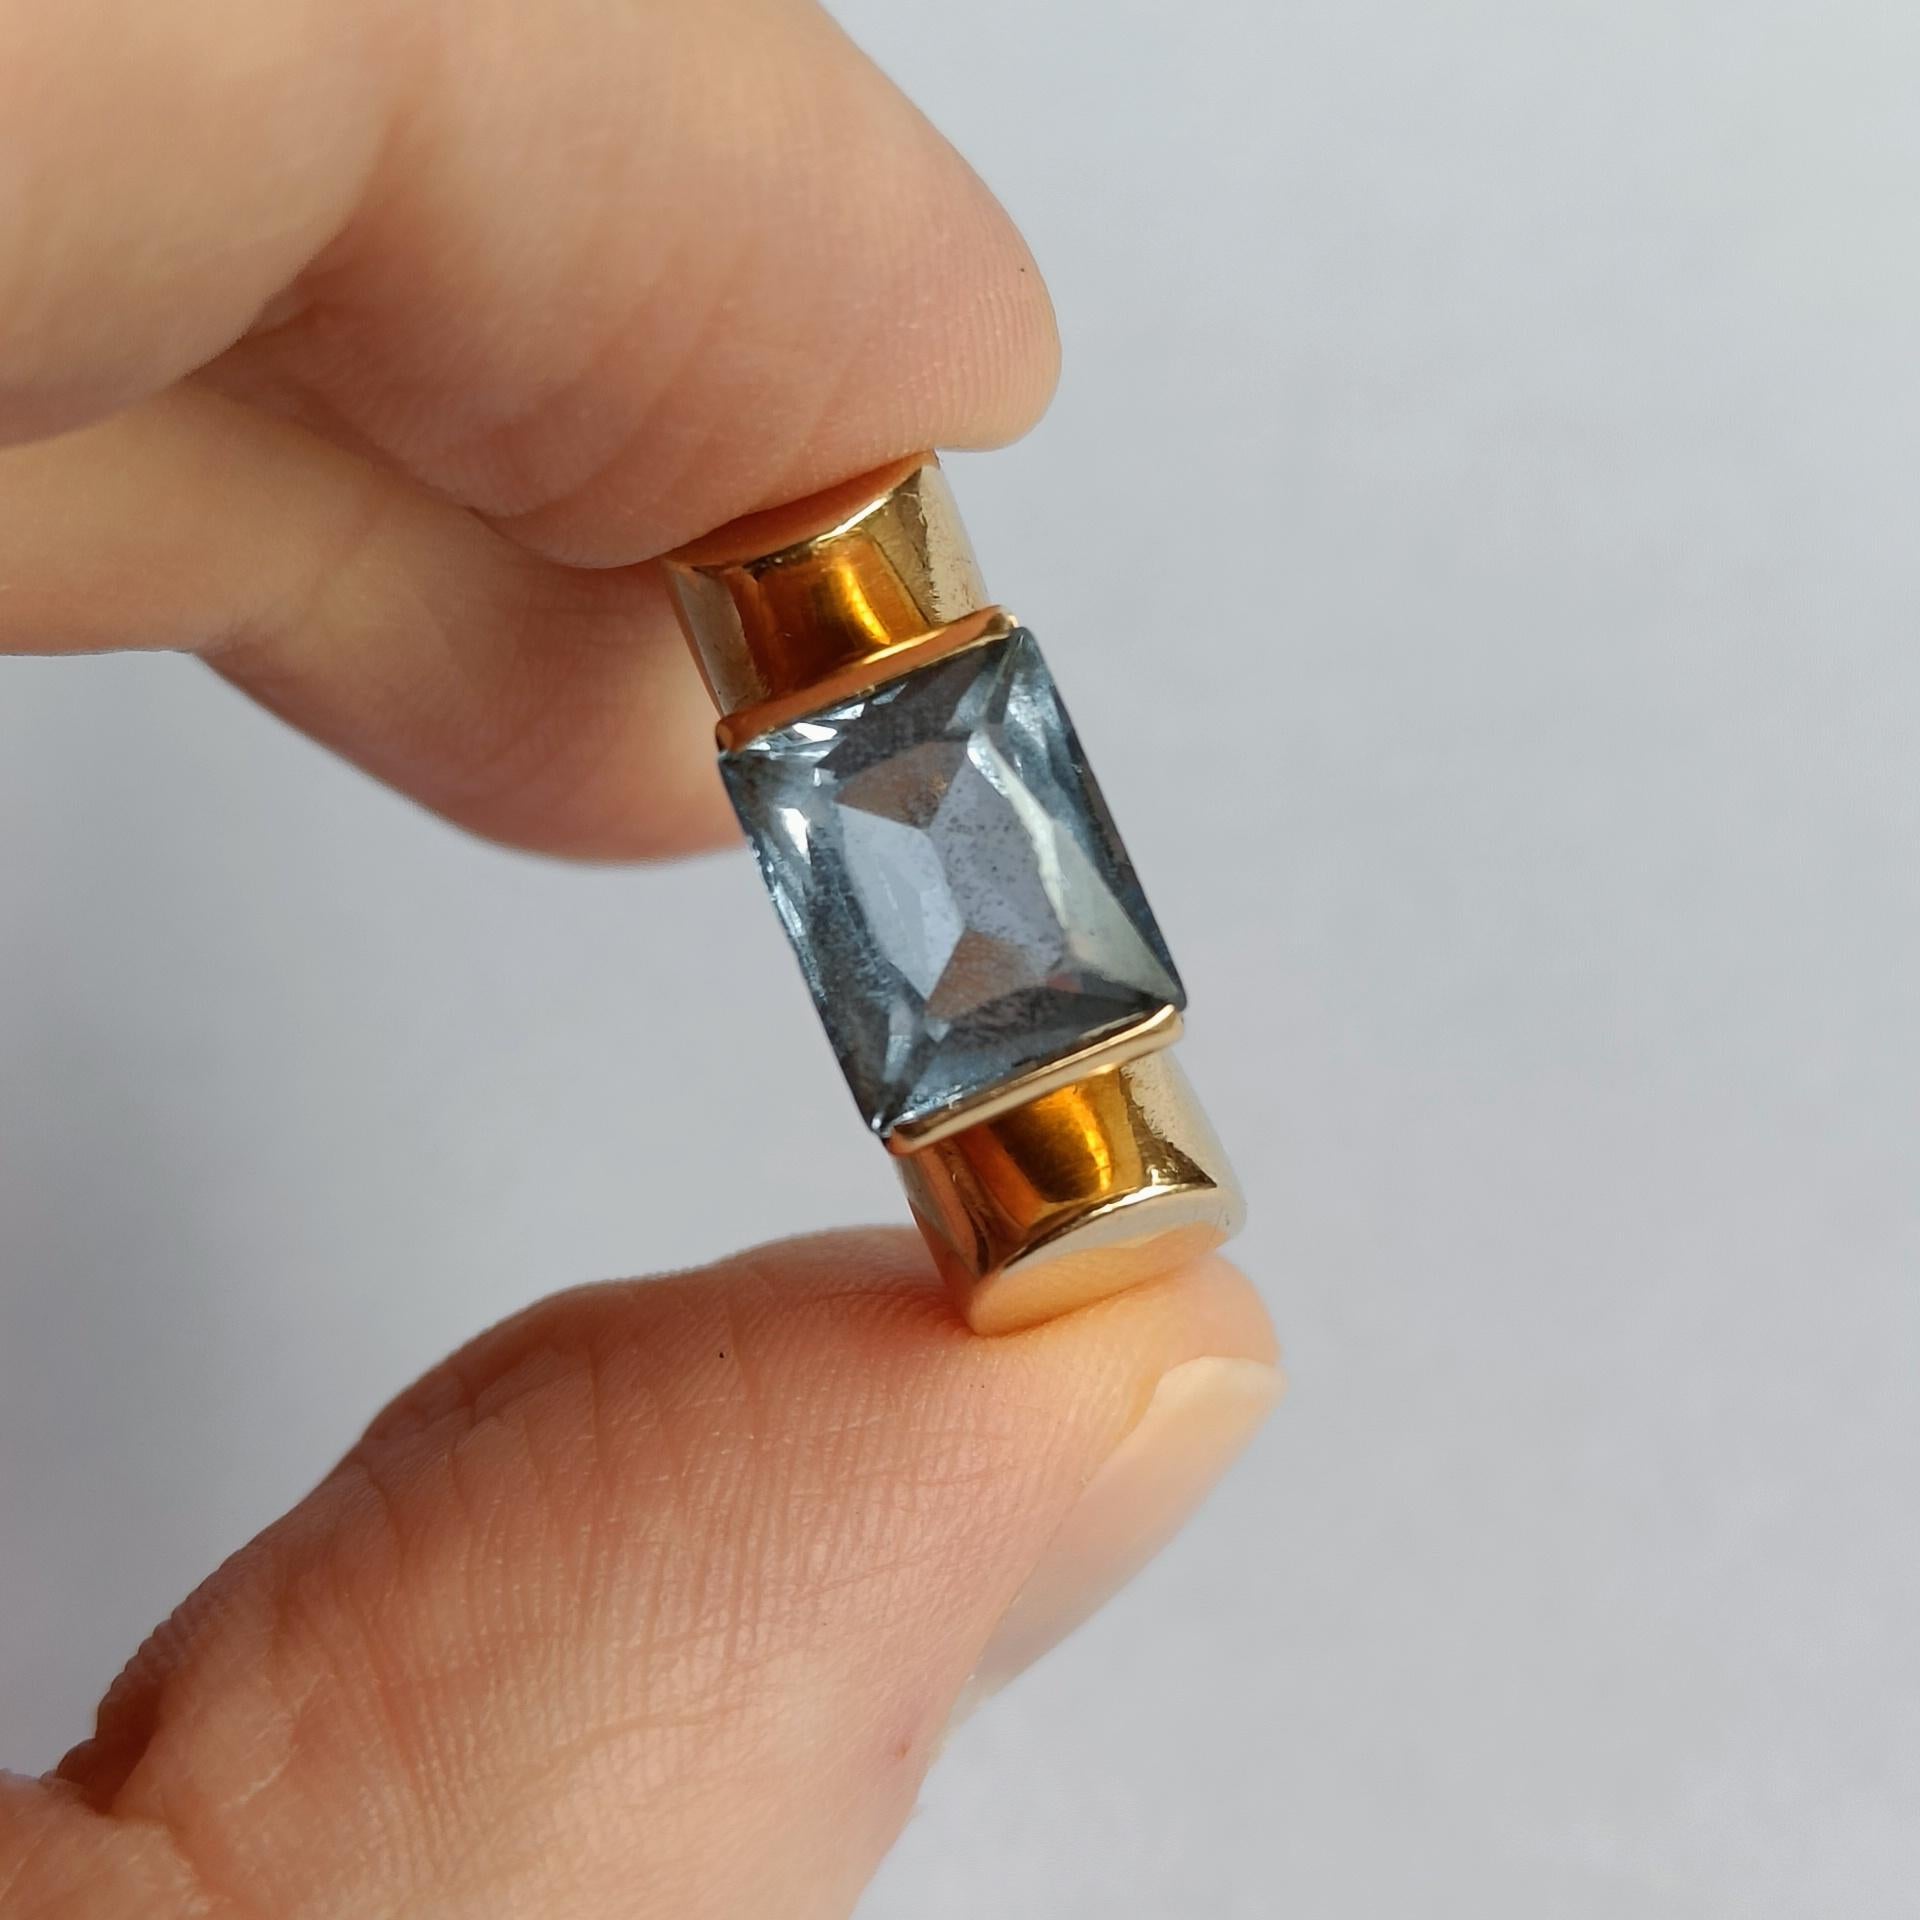 Chunky Art Deco 18k Gold Ring with Aquamarine - Sweden 1940s For Sale 7